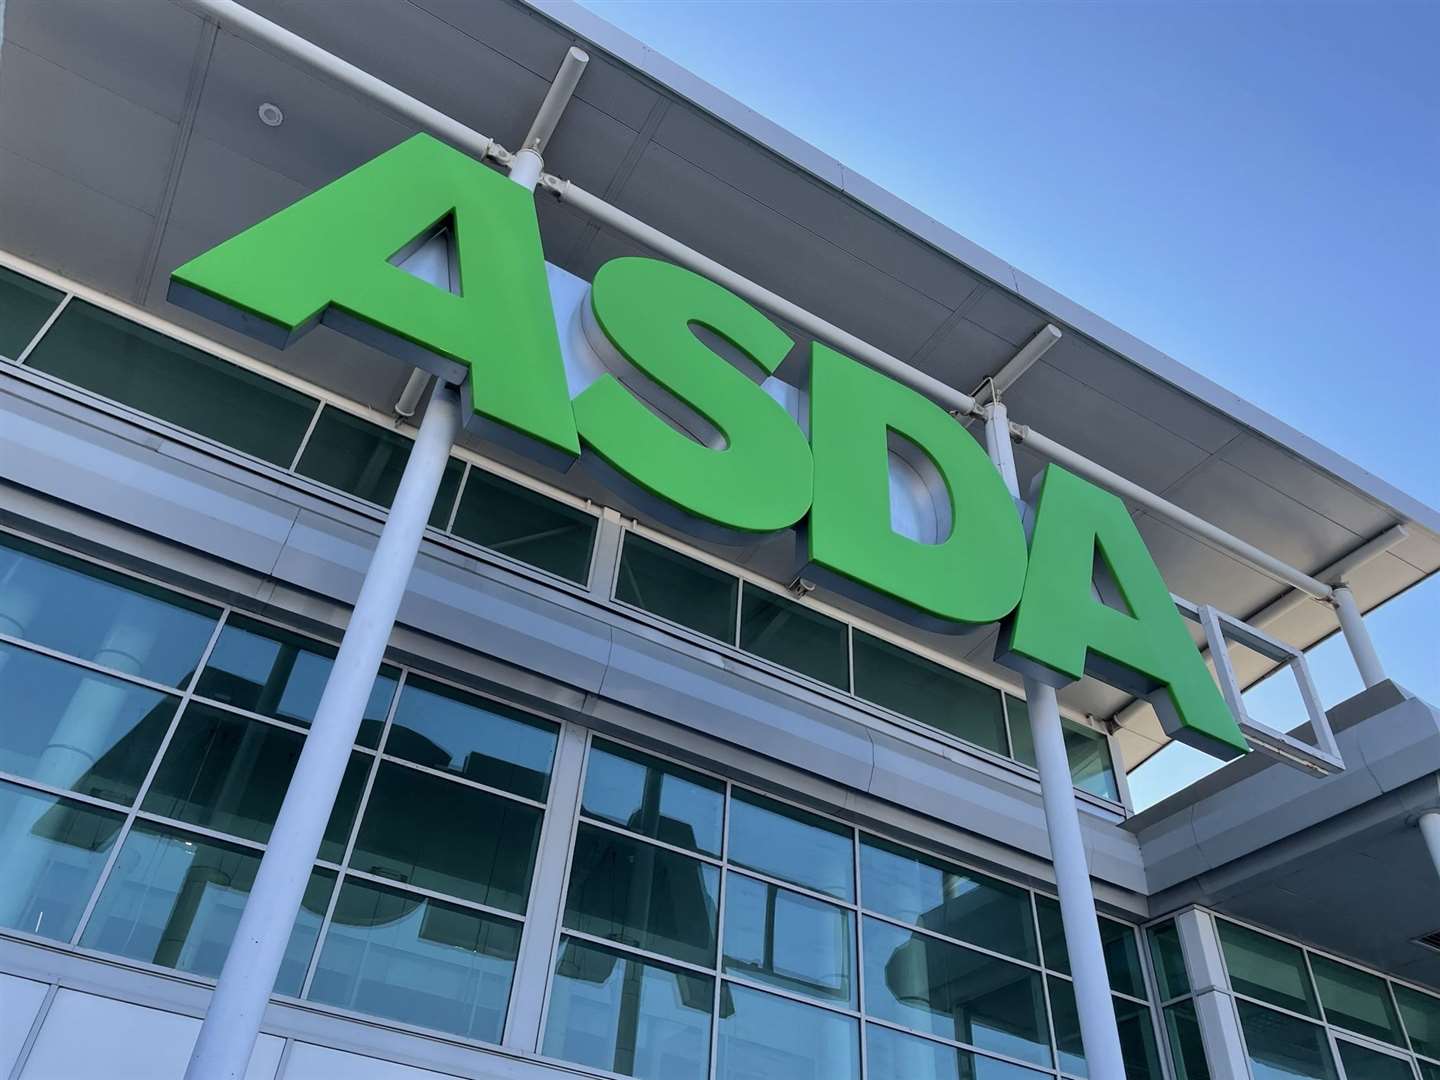 Asda plans to turn its cafes over to communities who would value a warm, safe space to meet